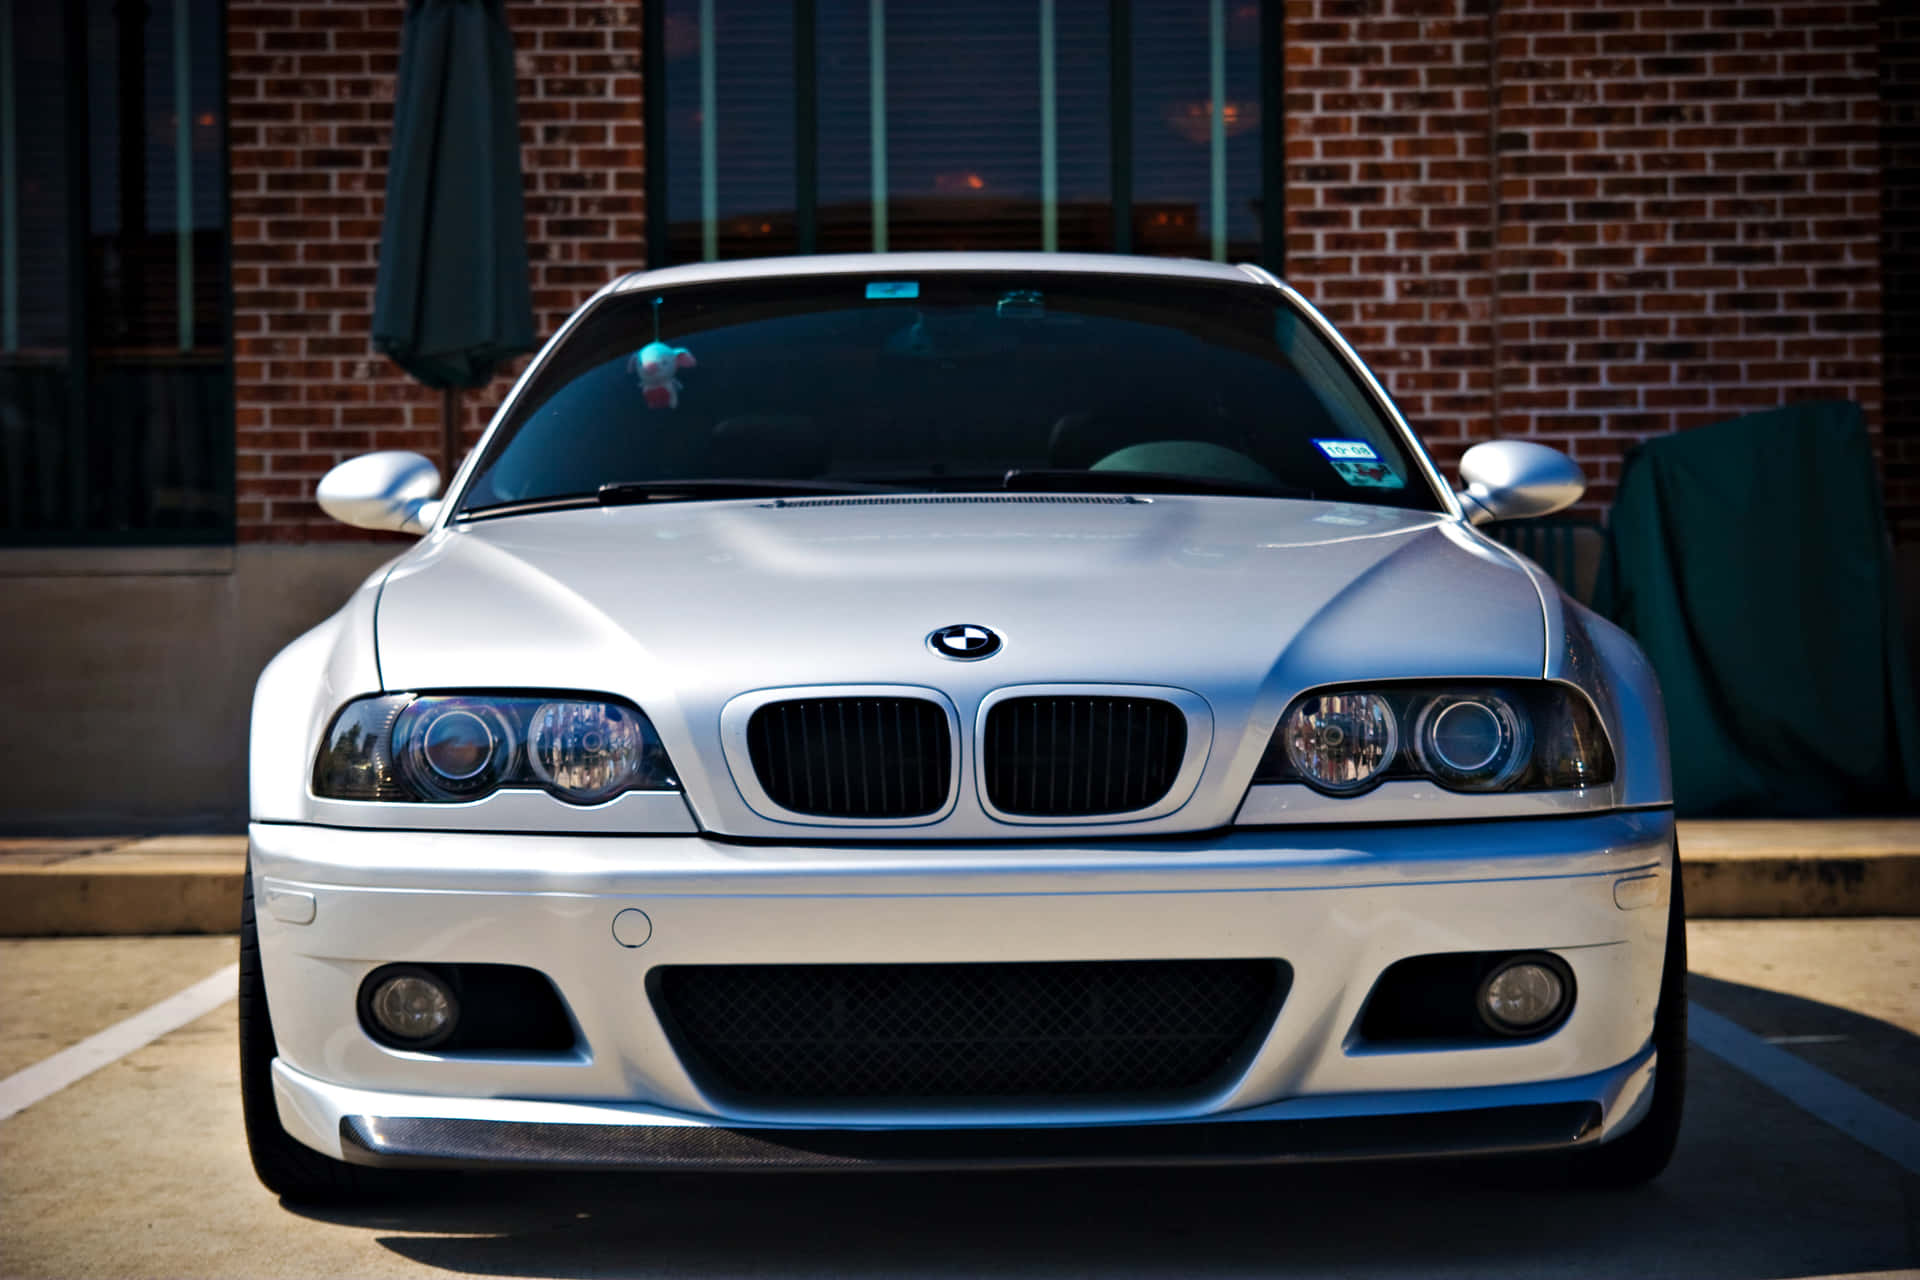 Silver B M W E46 Parked Outdoors Wallpaper